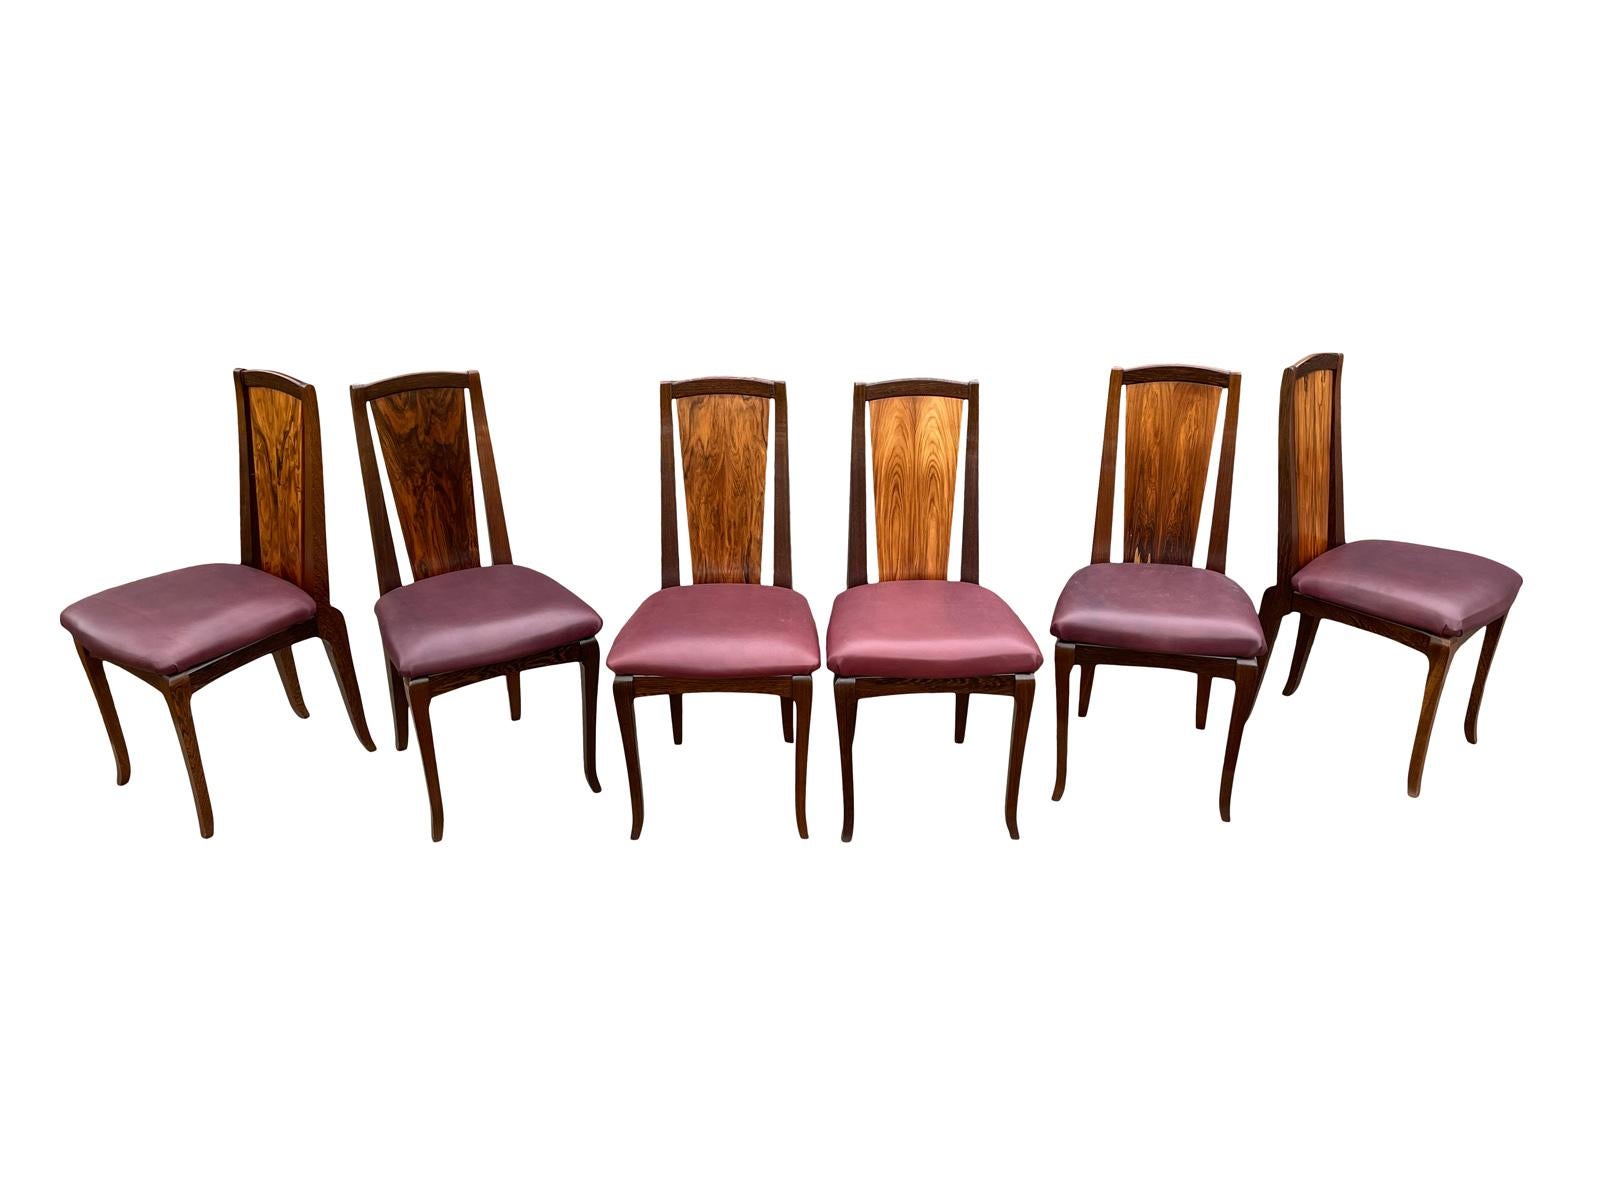 This 6 chairs are made of solid Morado Rosewood and Black African Wenge custom made in the manner of George Nakashima by Gary Fassler in the New Hope Pennsylvania área.